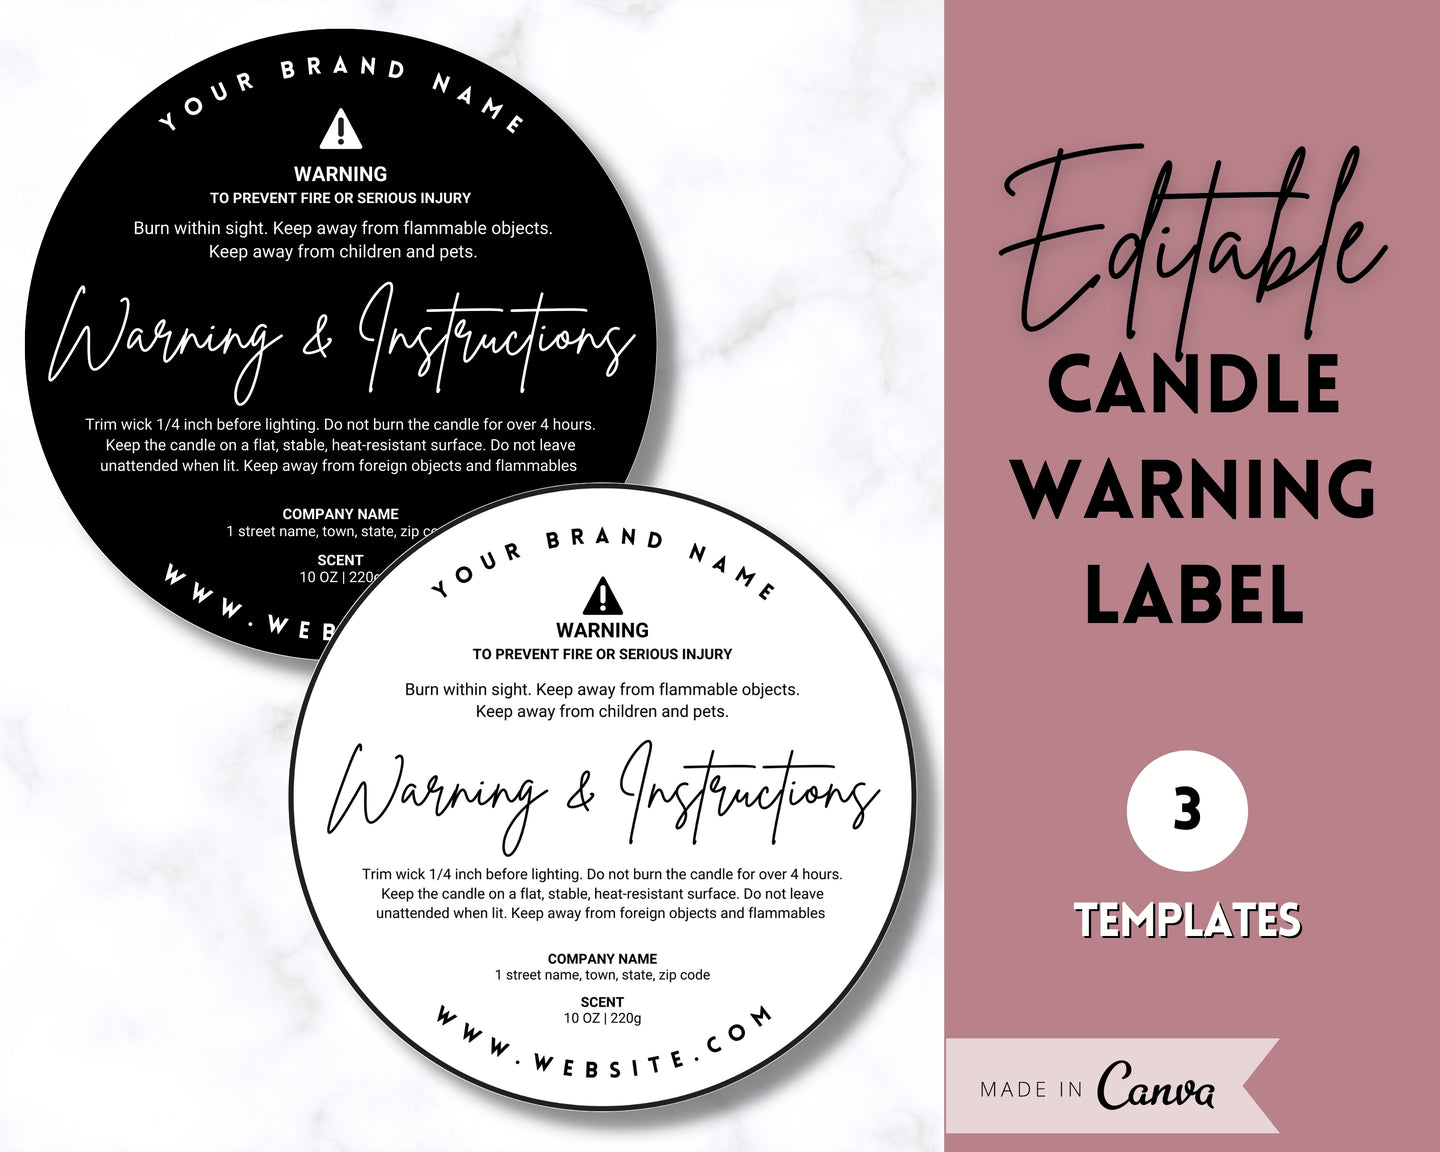 EDITABLE Candle Warning Label Template | Candle Care & Fire Safety Instructions, Round Packaging Label Care Card, Candle Maker Seller | Brit